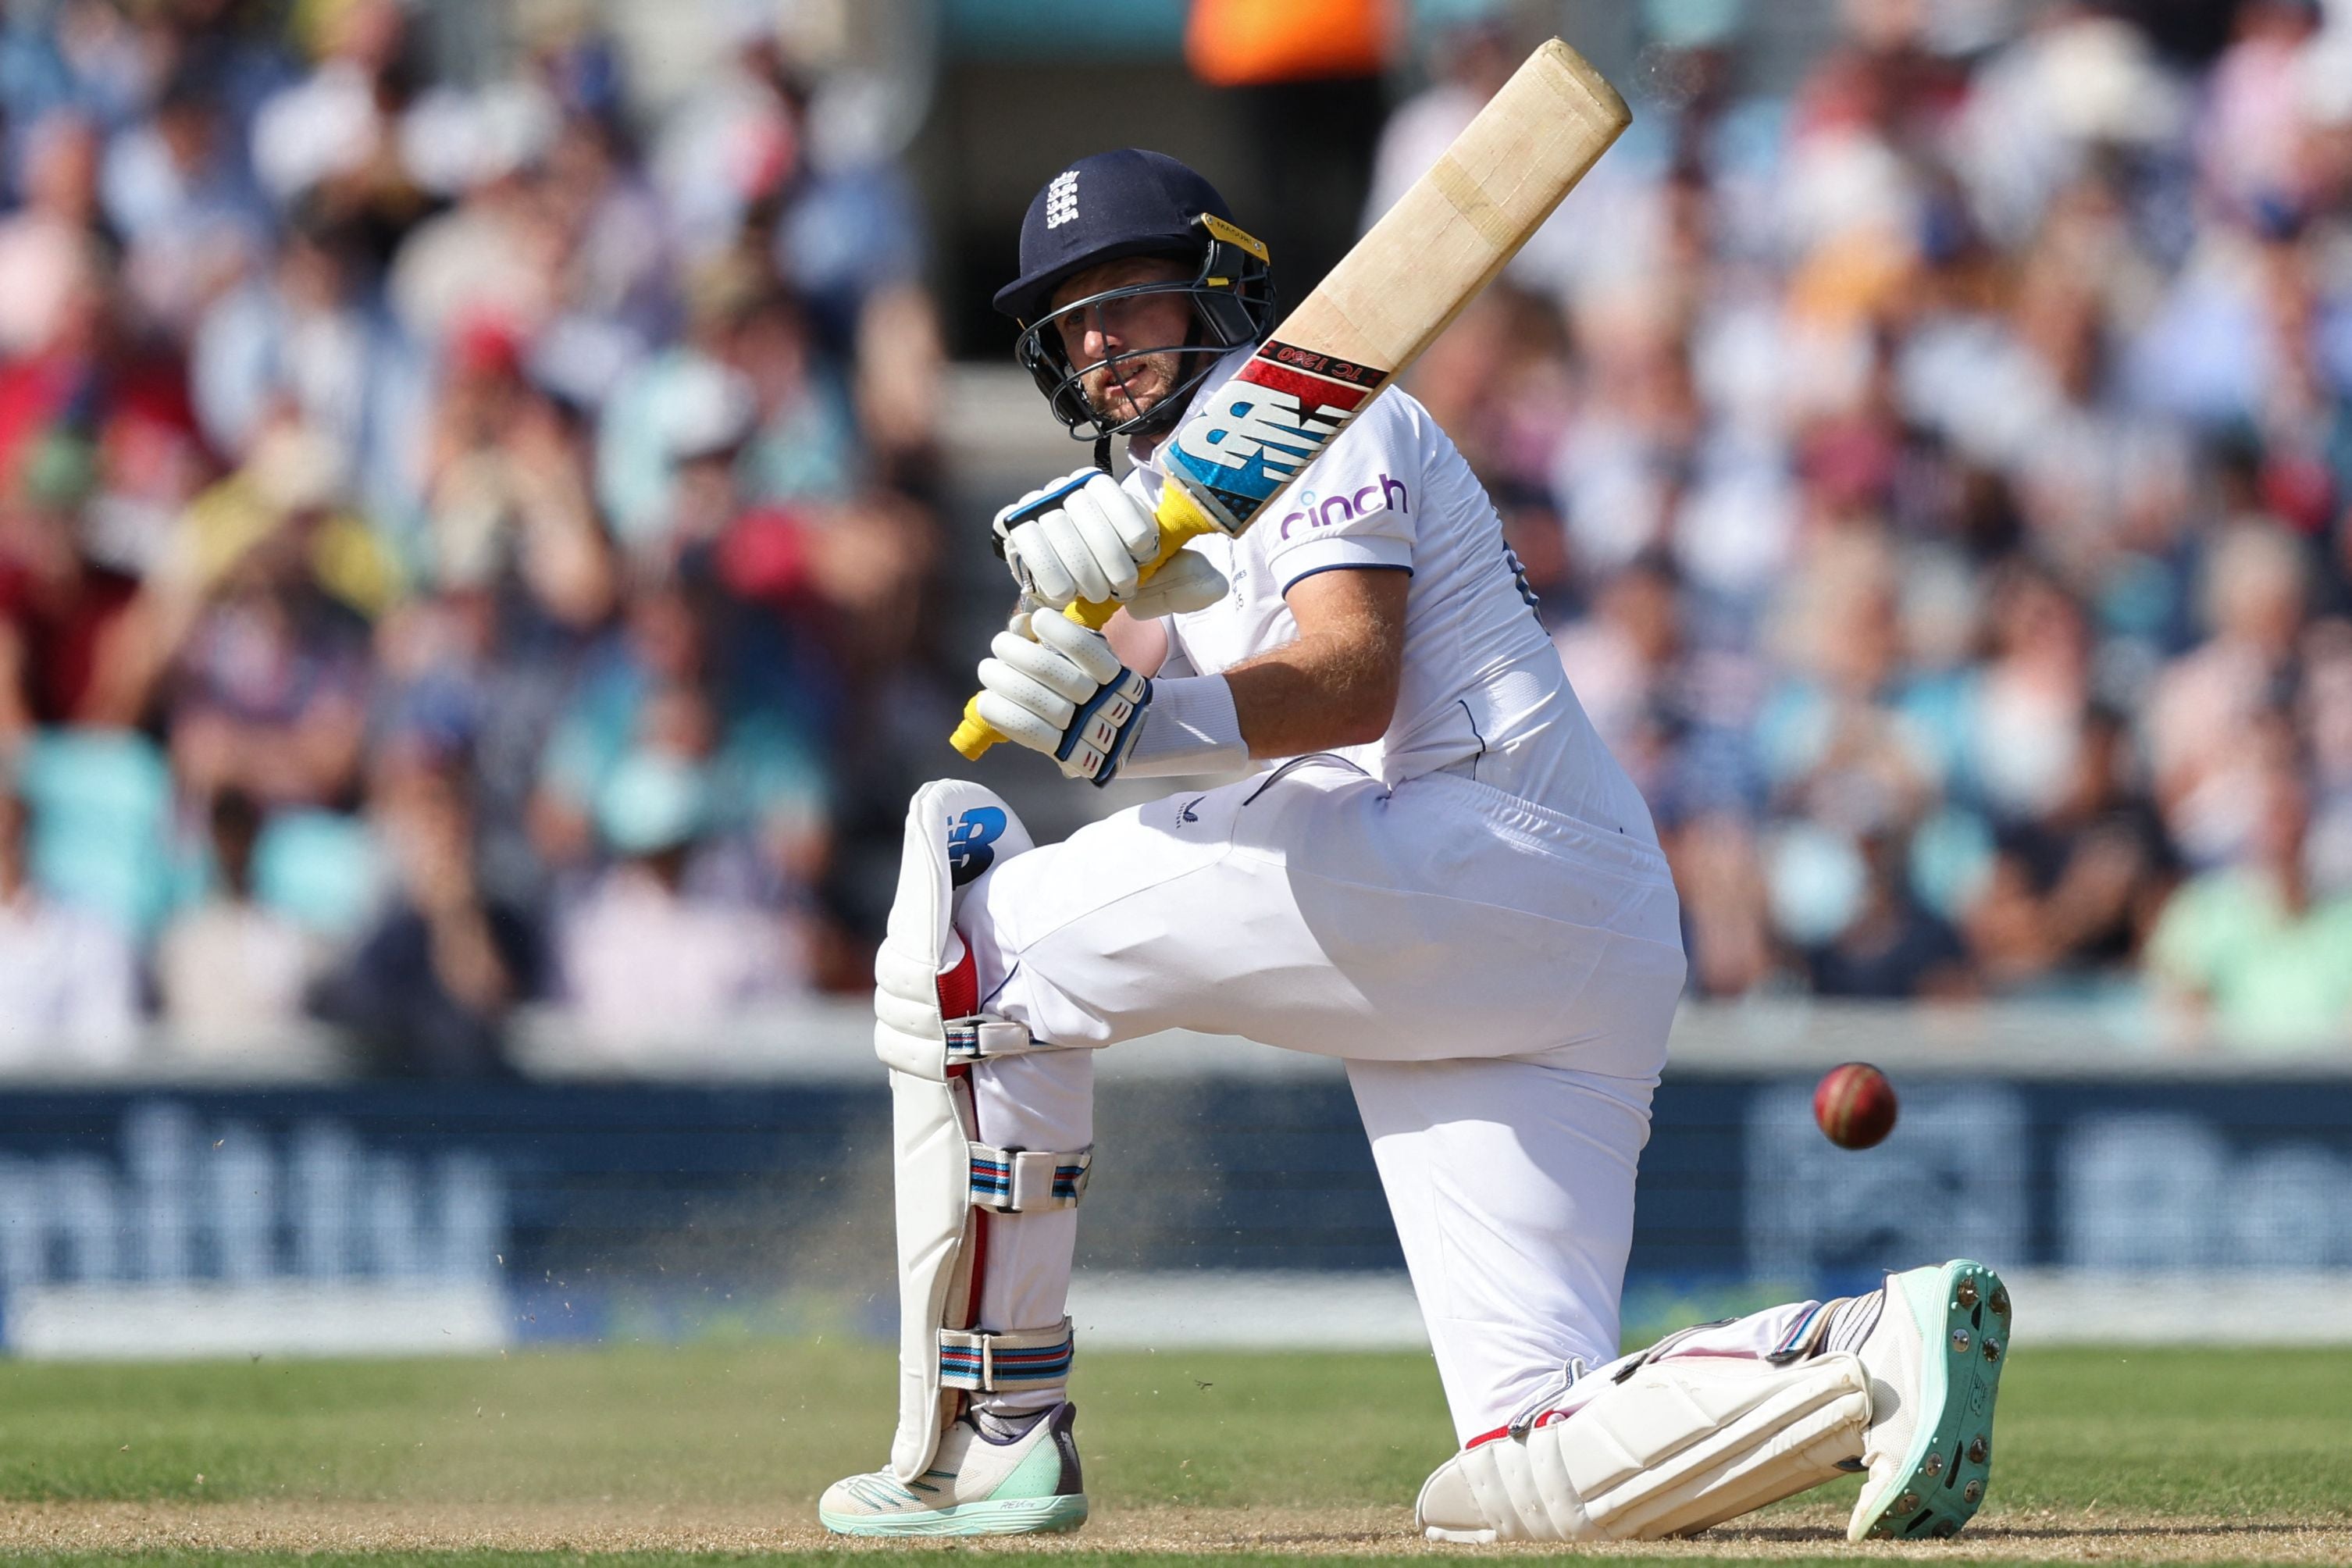 Joe Root sweeps a ball towards the boundary on his way to making 91